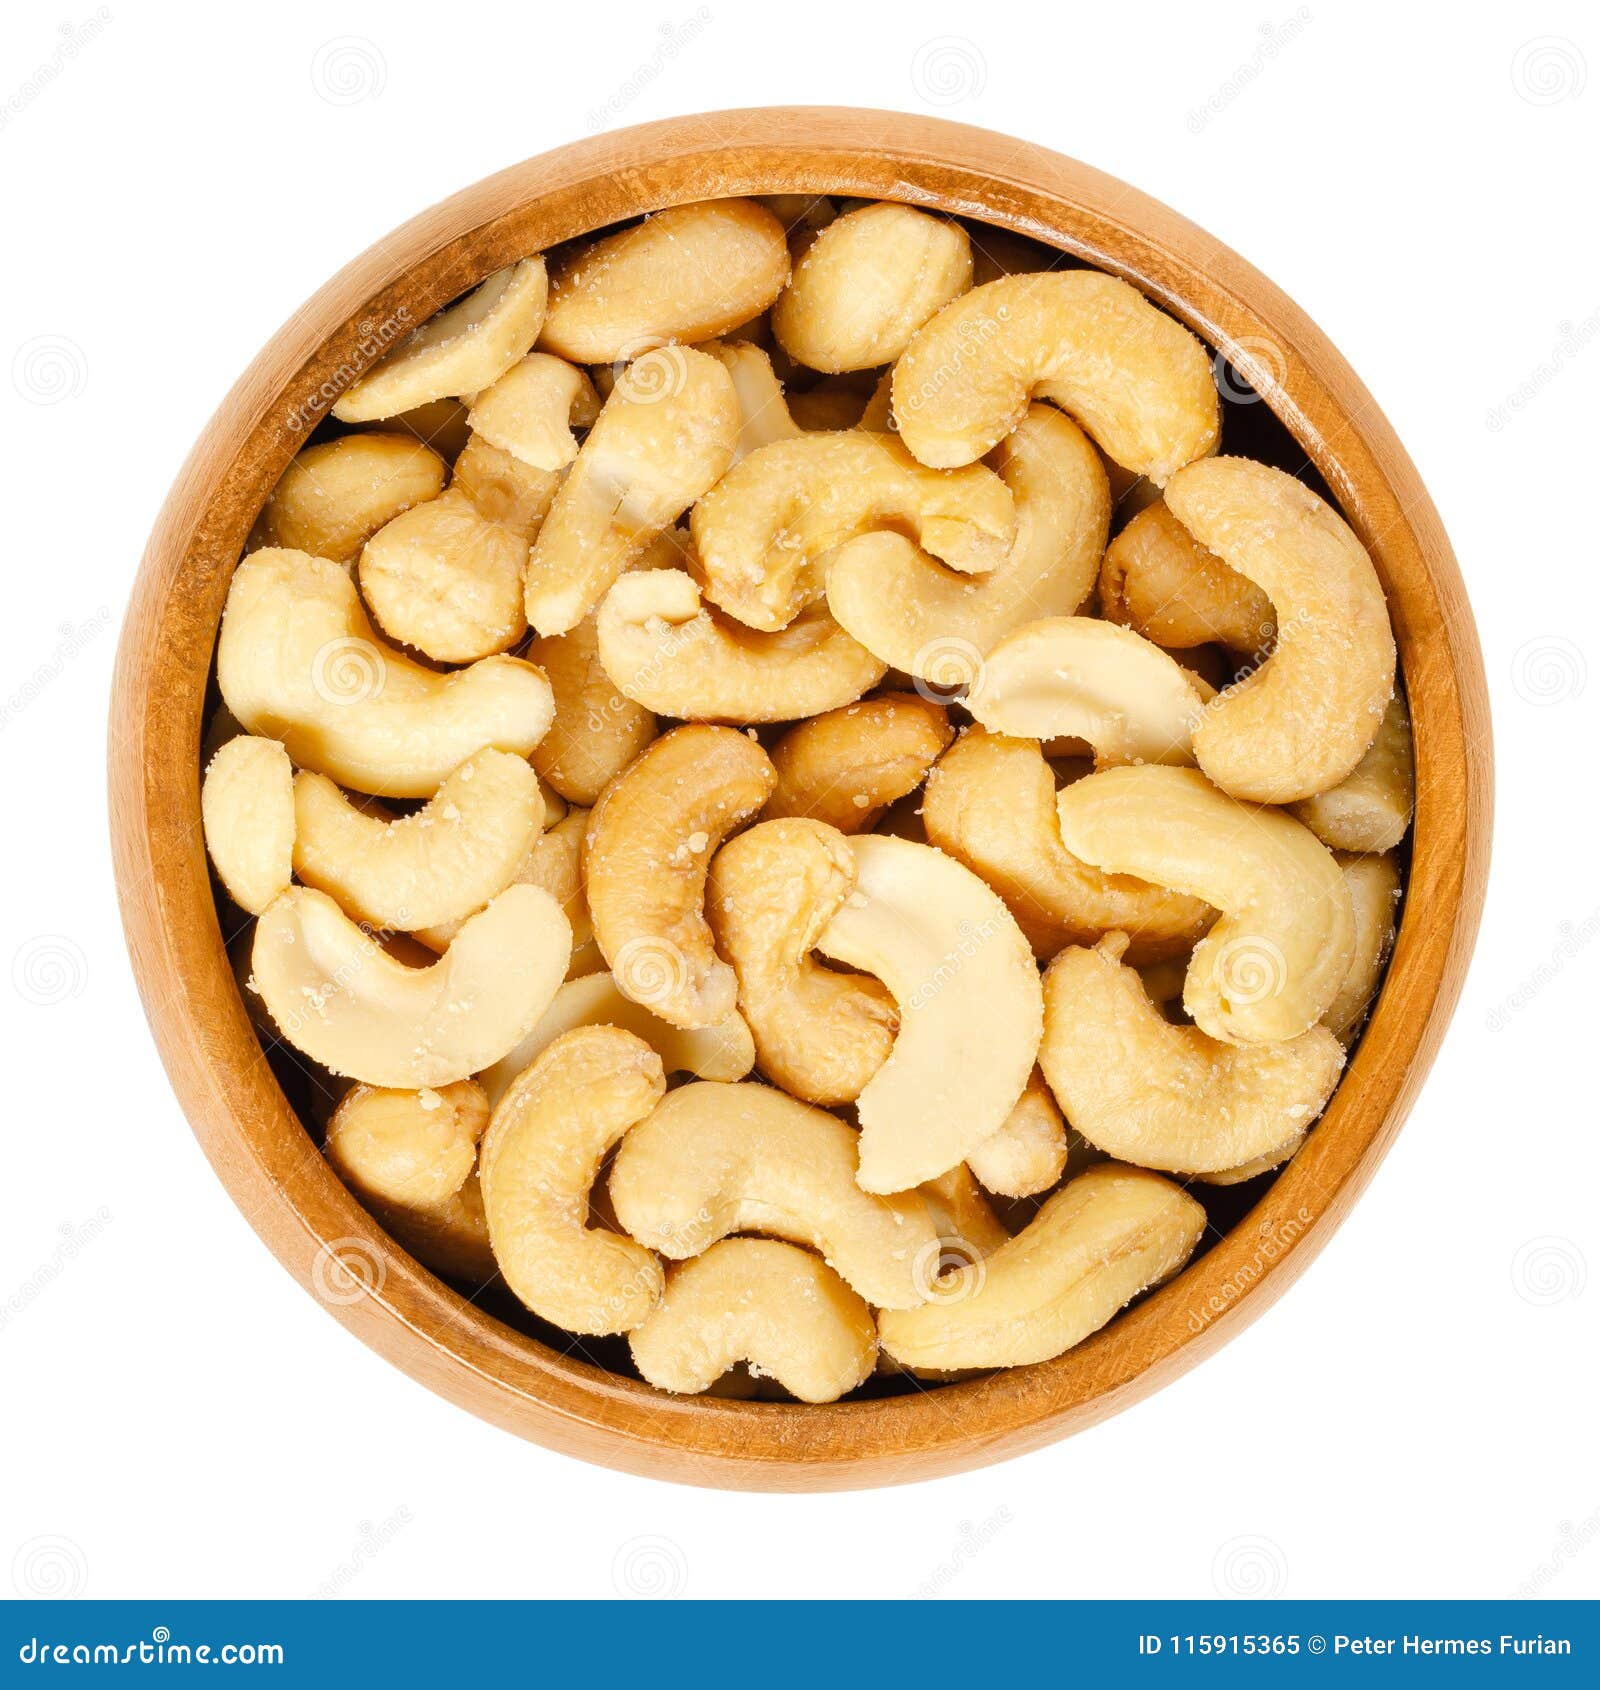 roasted salted whole cashews in wooden bowl over white